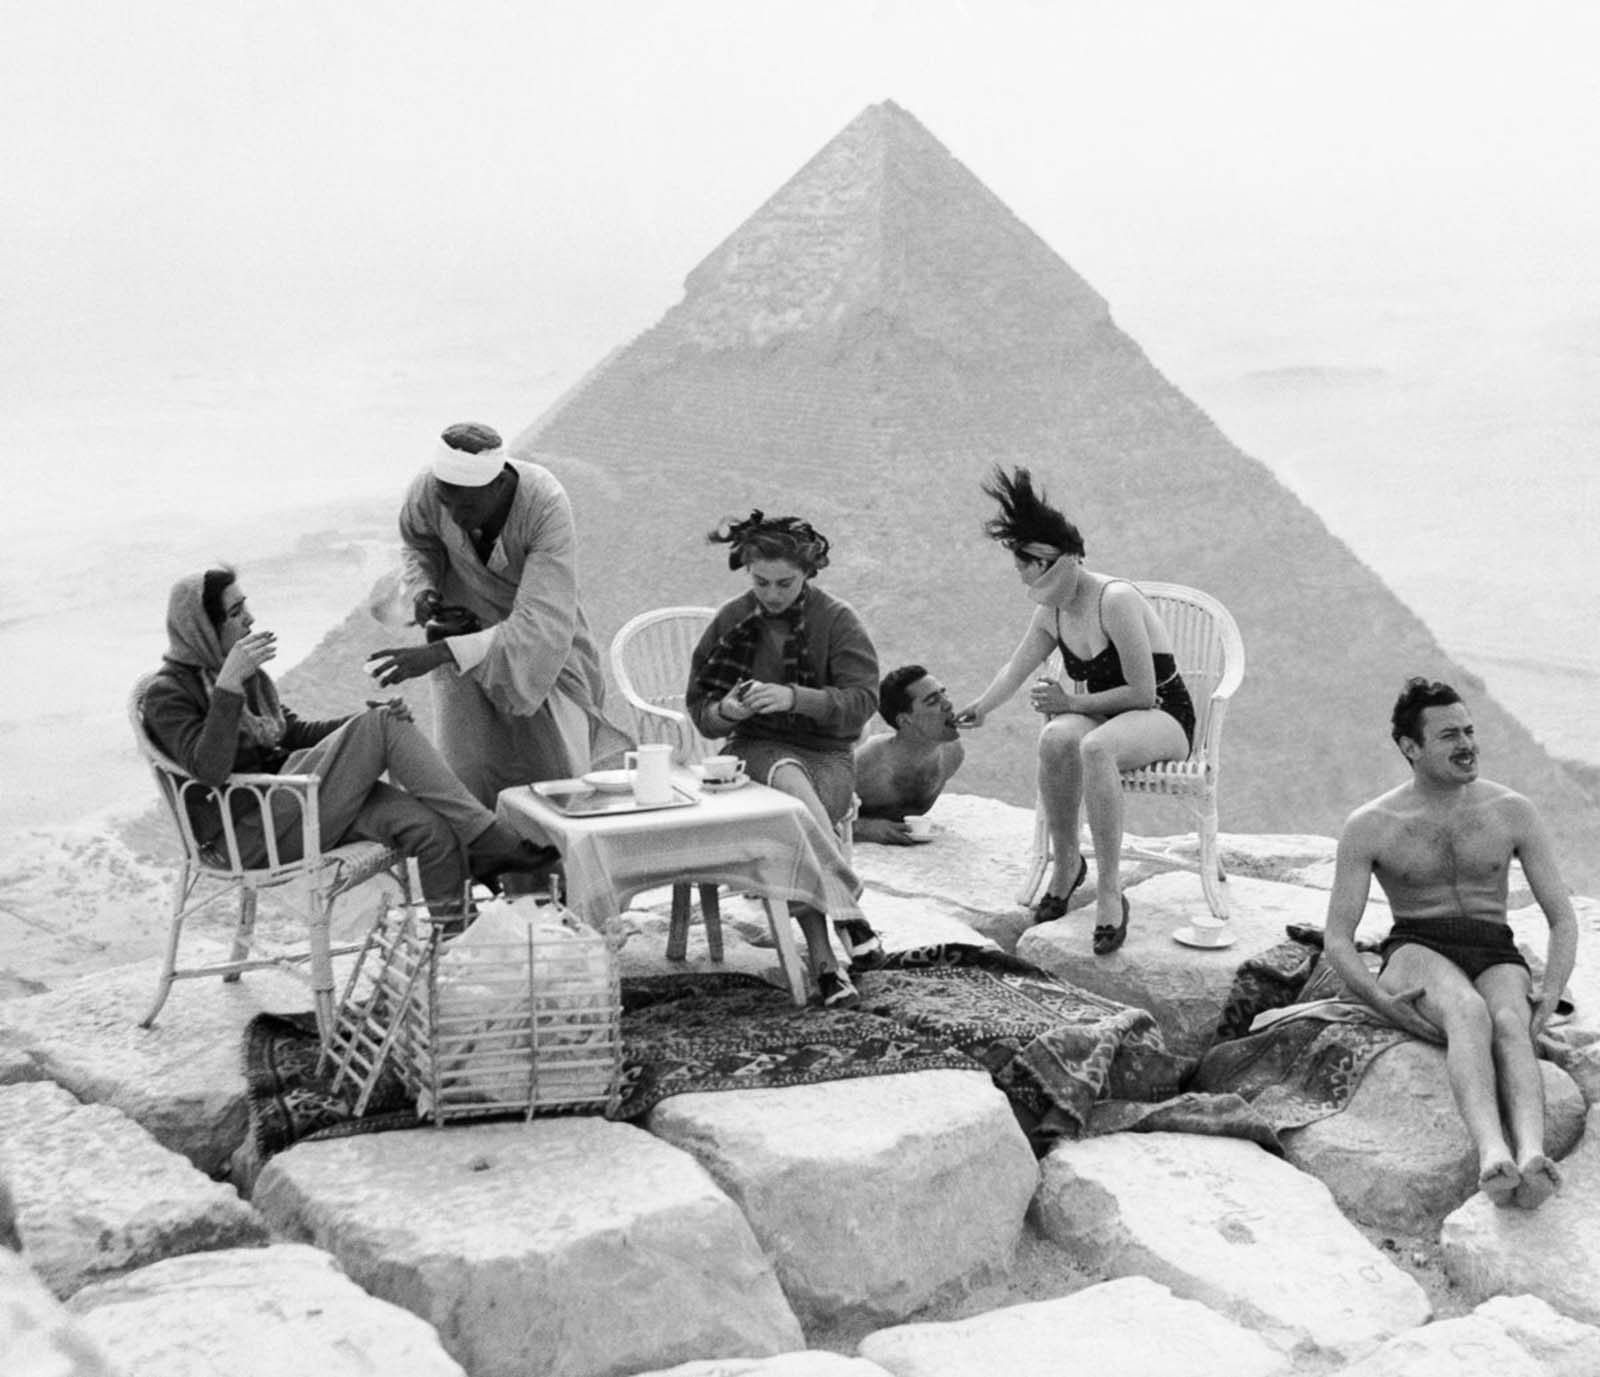 Early Tourists Visiting The Pyramids And Ruins Of Ancient